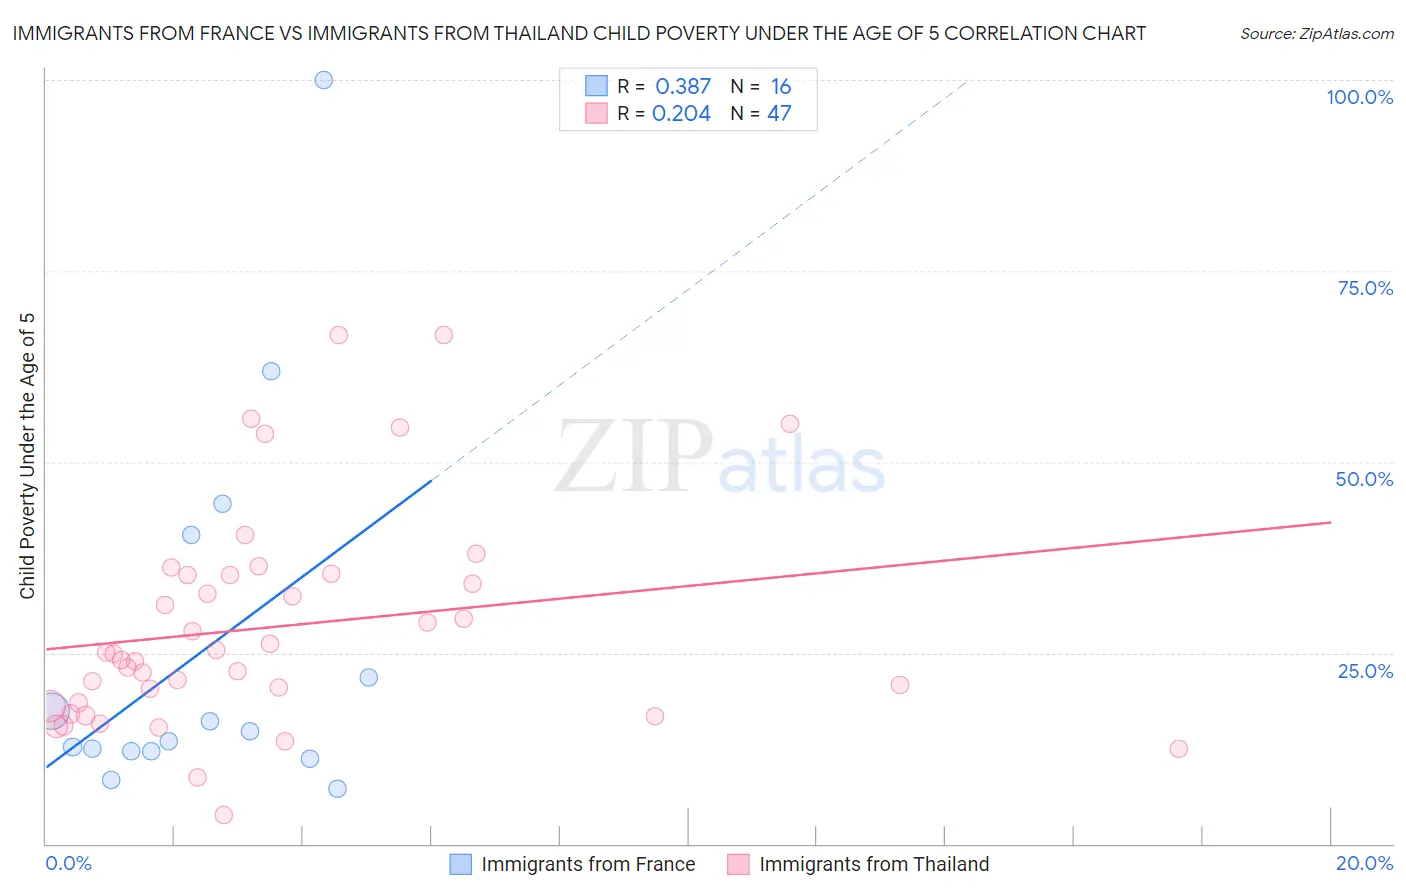 Immigrants from France vs Immigrants from Thailand Child Poverty Under the Age of 5